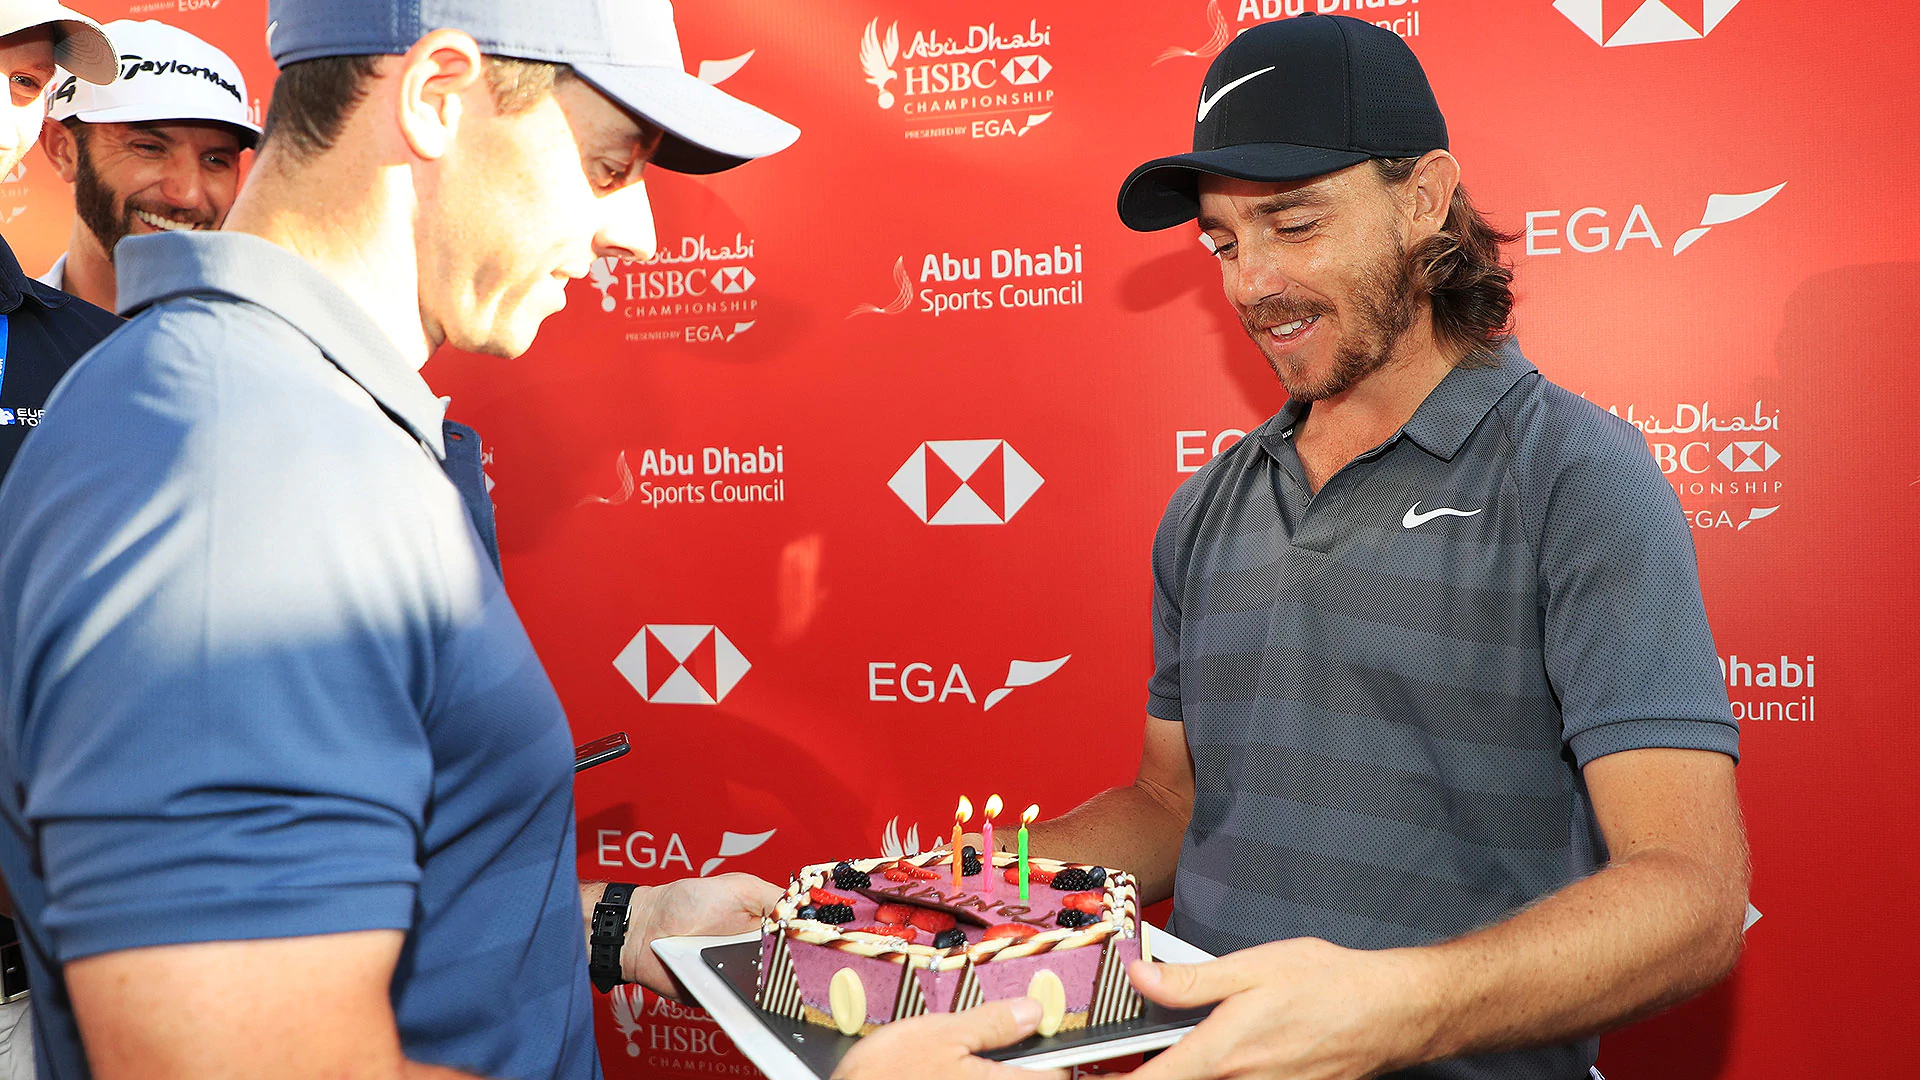 Watch: McIlroy gives Fleetwood a birthday cake